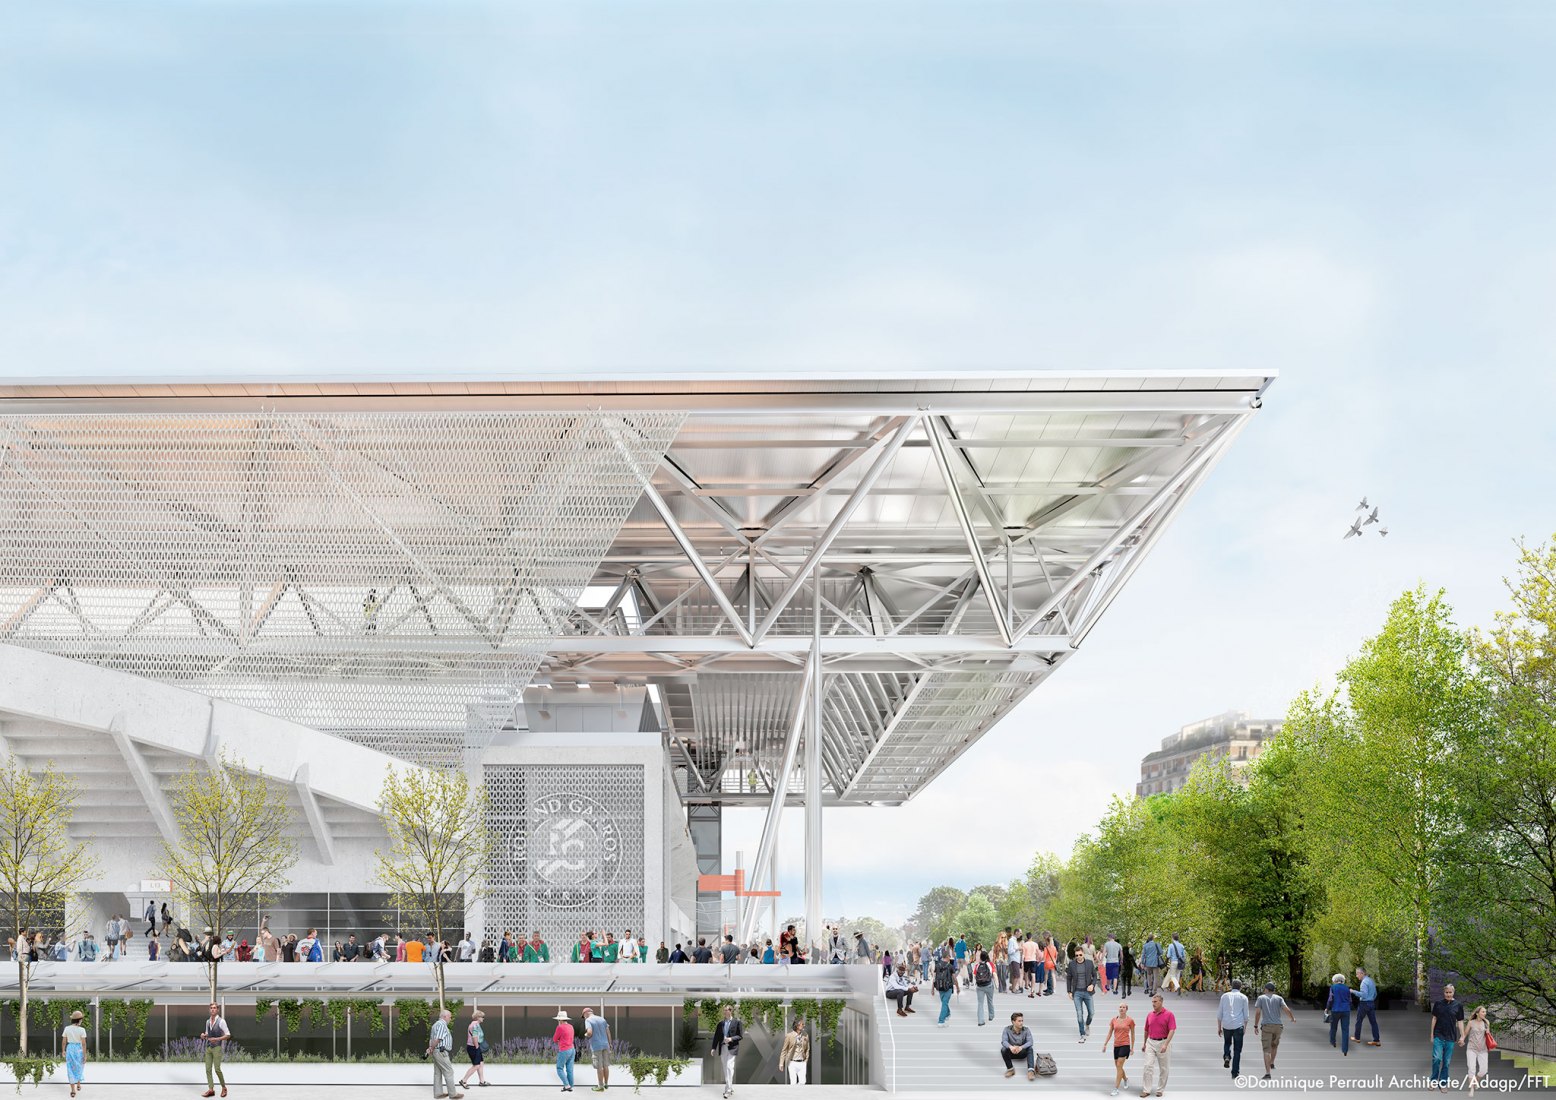 Rendering. Retractable roof on Suzanne Lenglen tennis court by Dominique Perrault